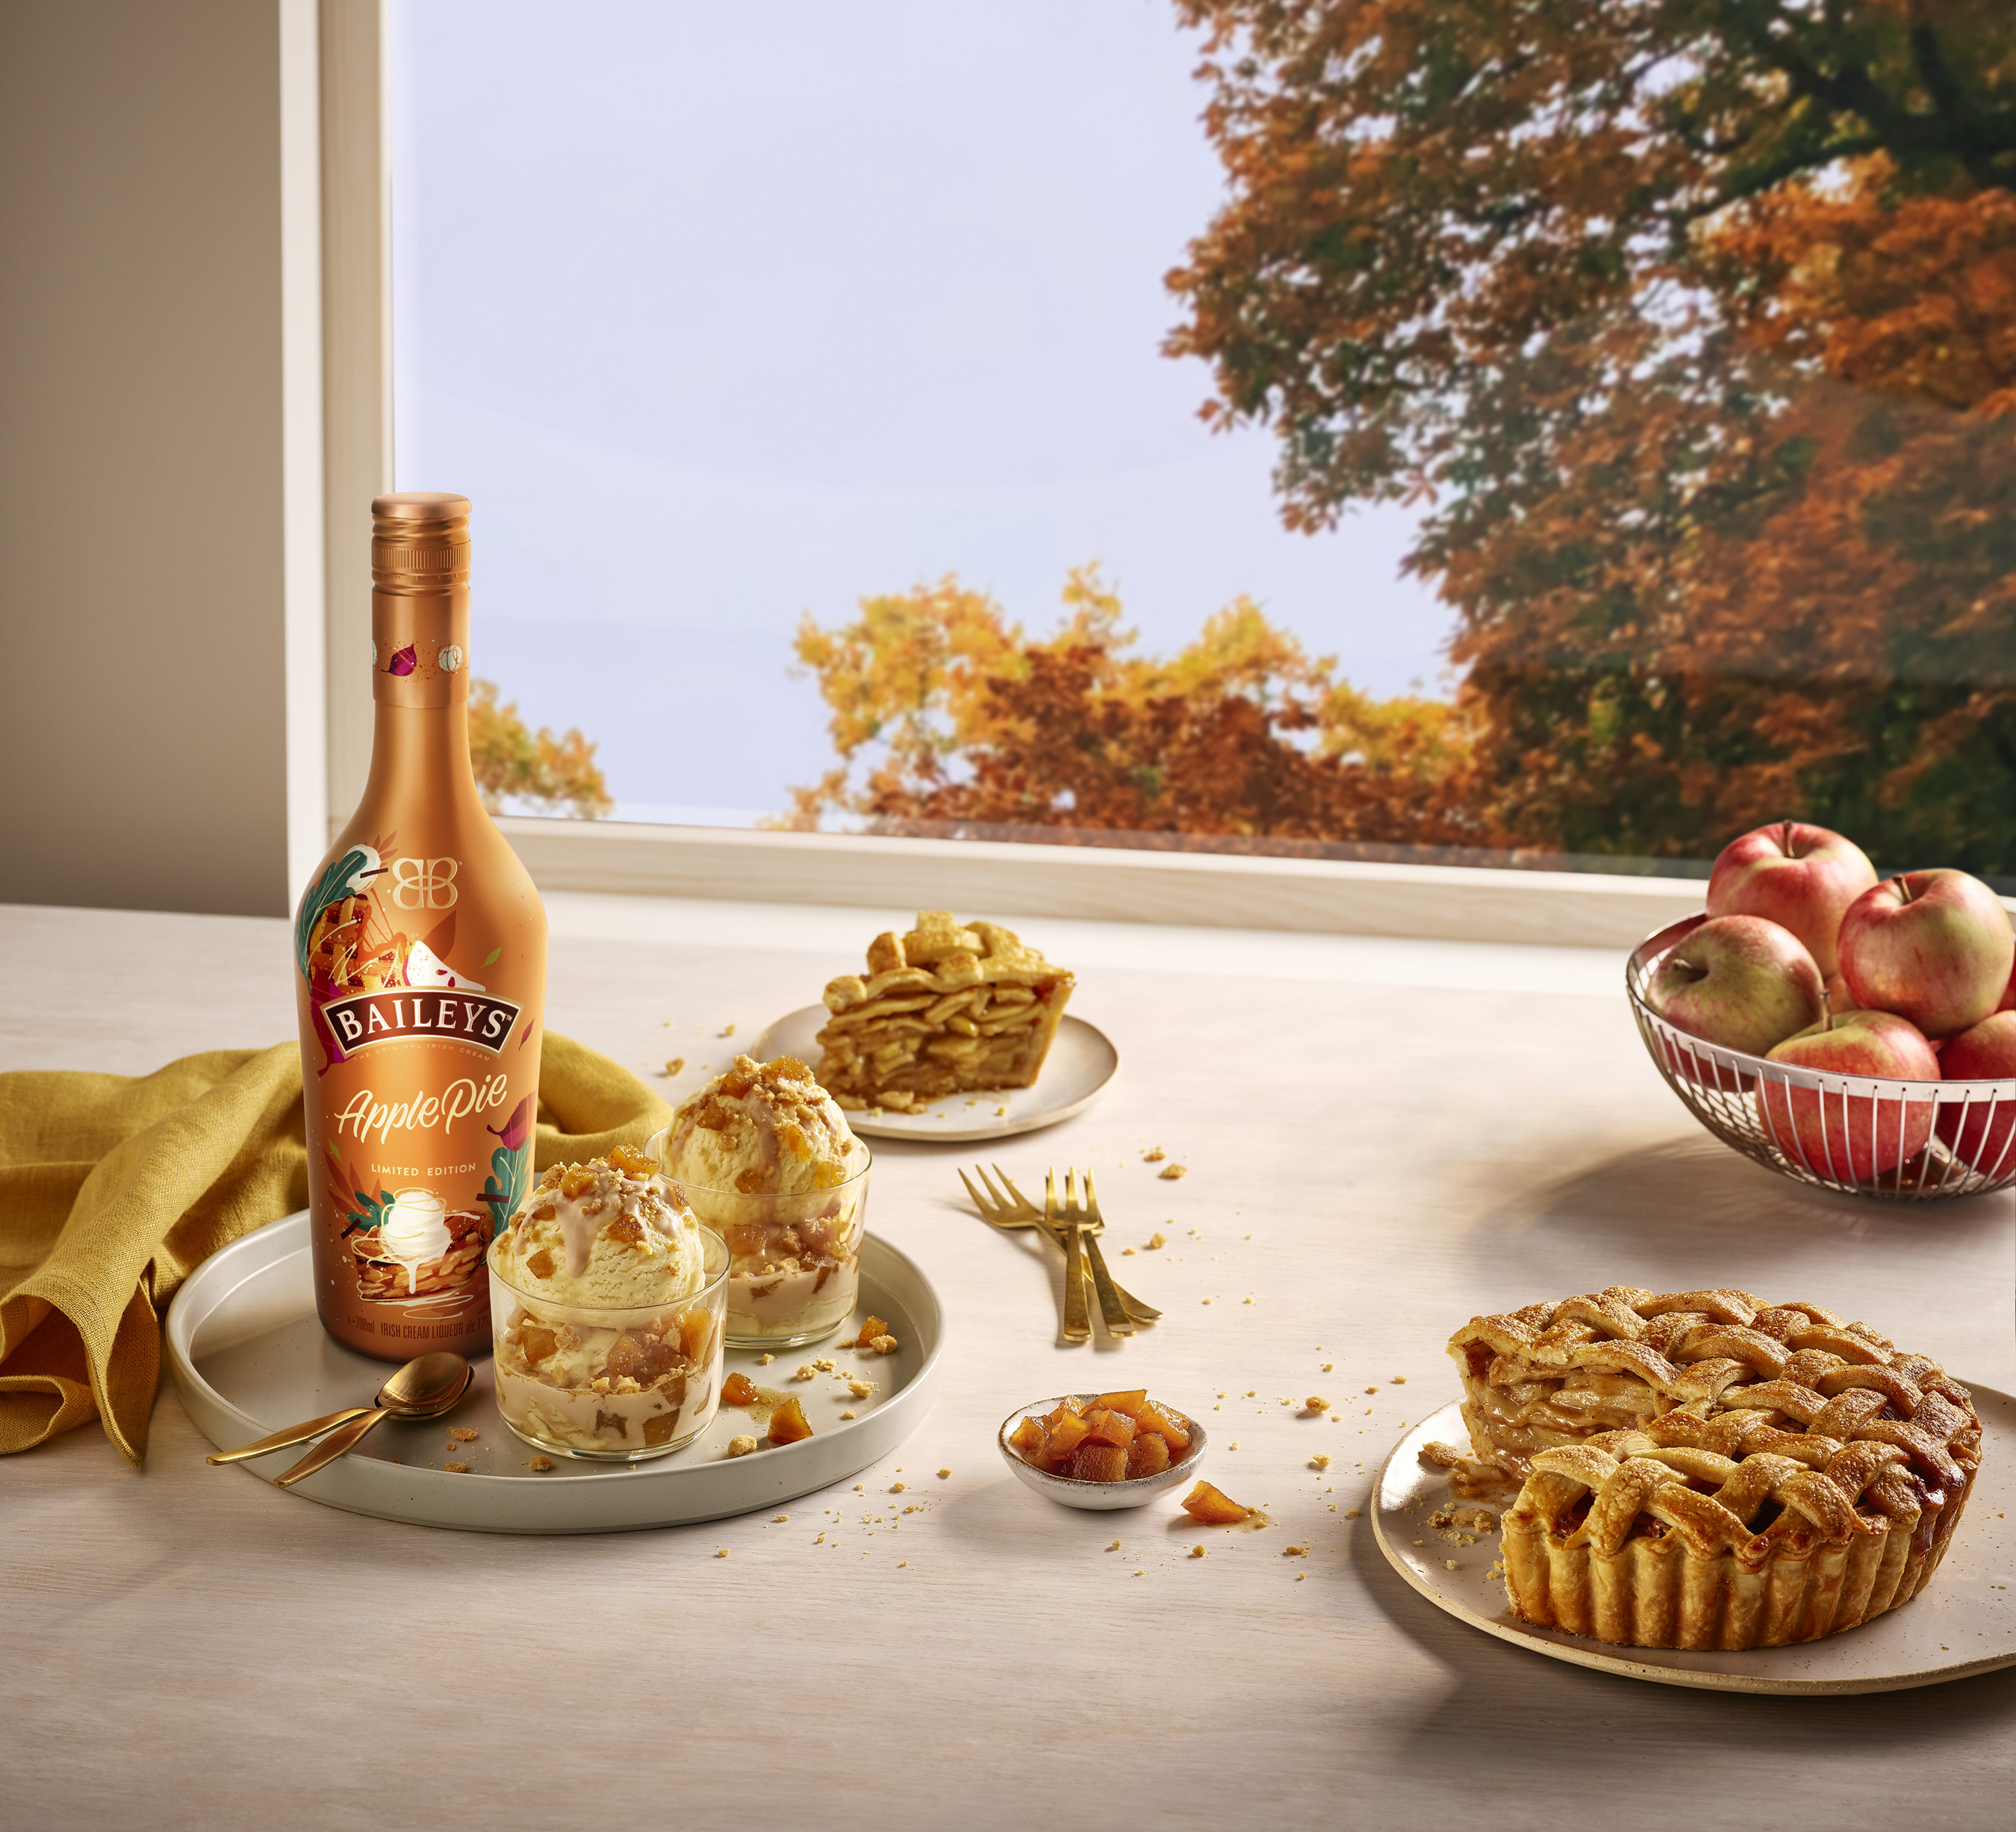 Baileys Introduces New Limited Time Offering Baileys Apple Pie.